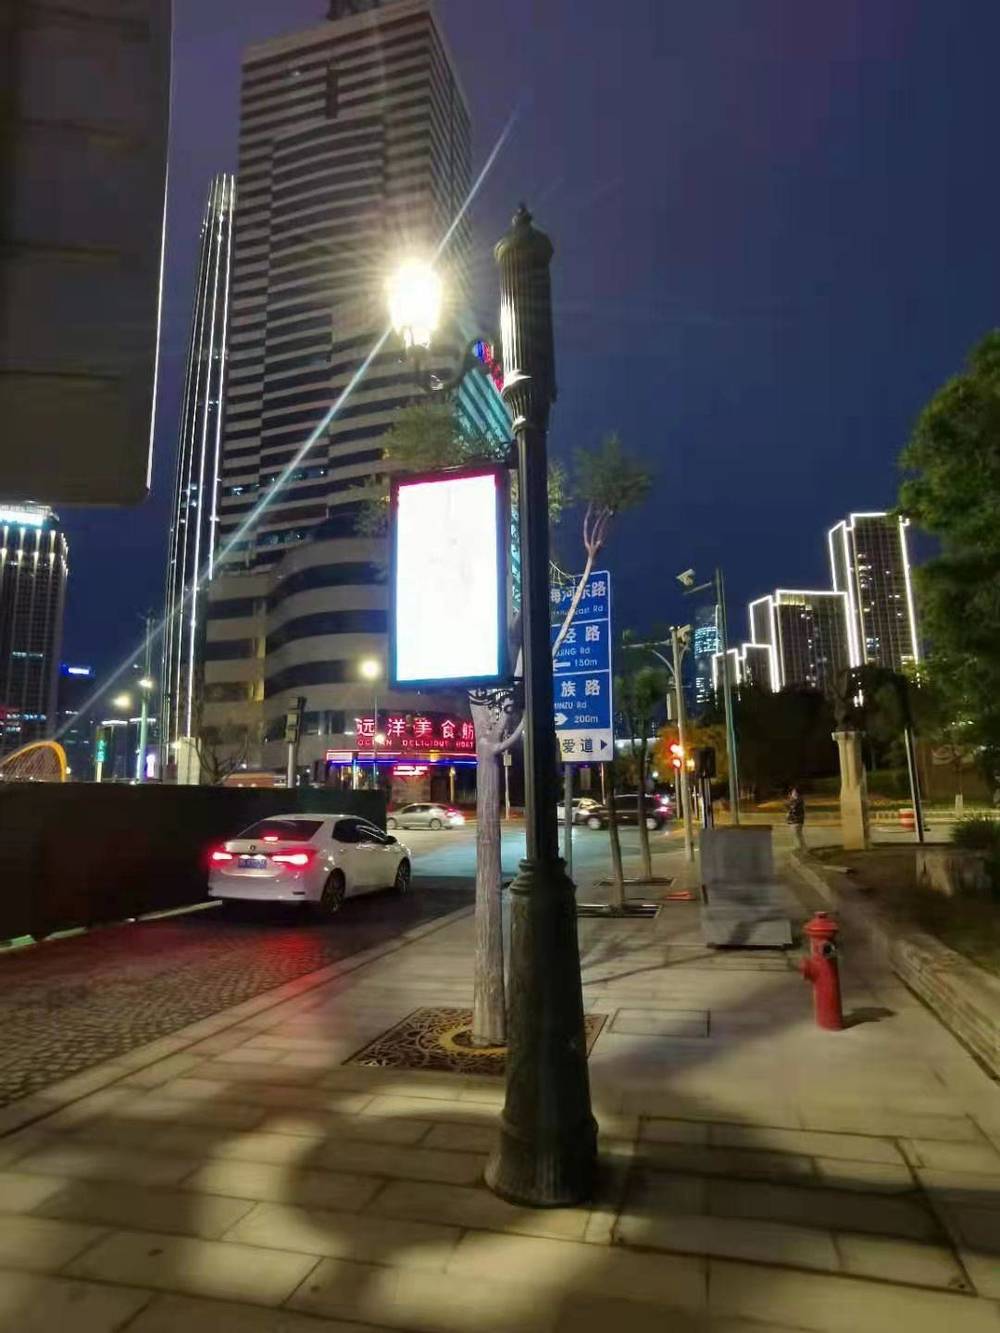 Zhilian ICT smart street lamp lights up the bright night view of the city!